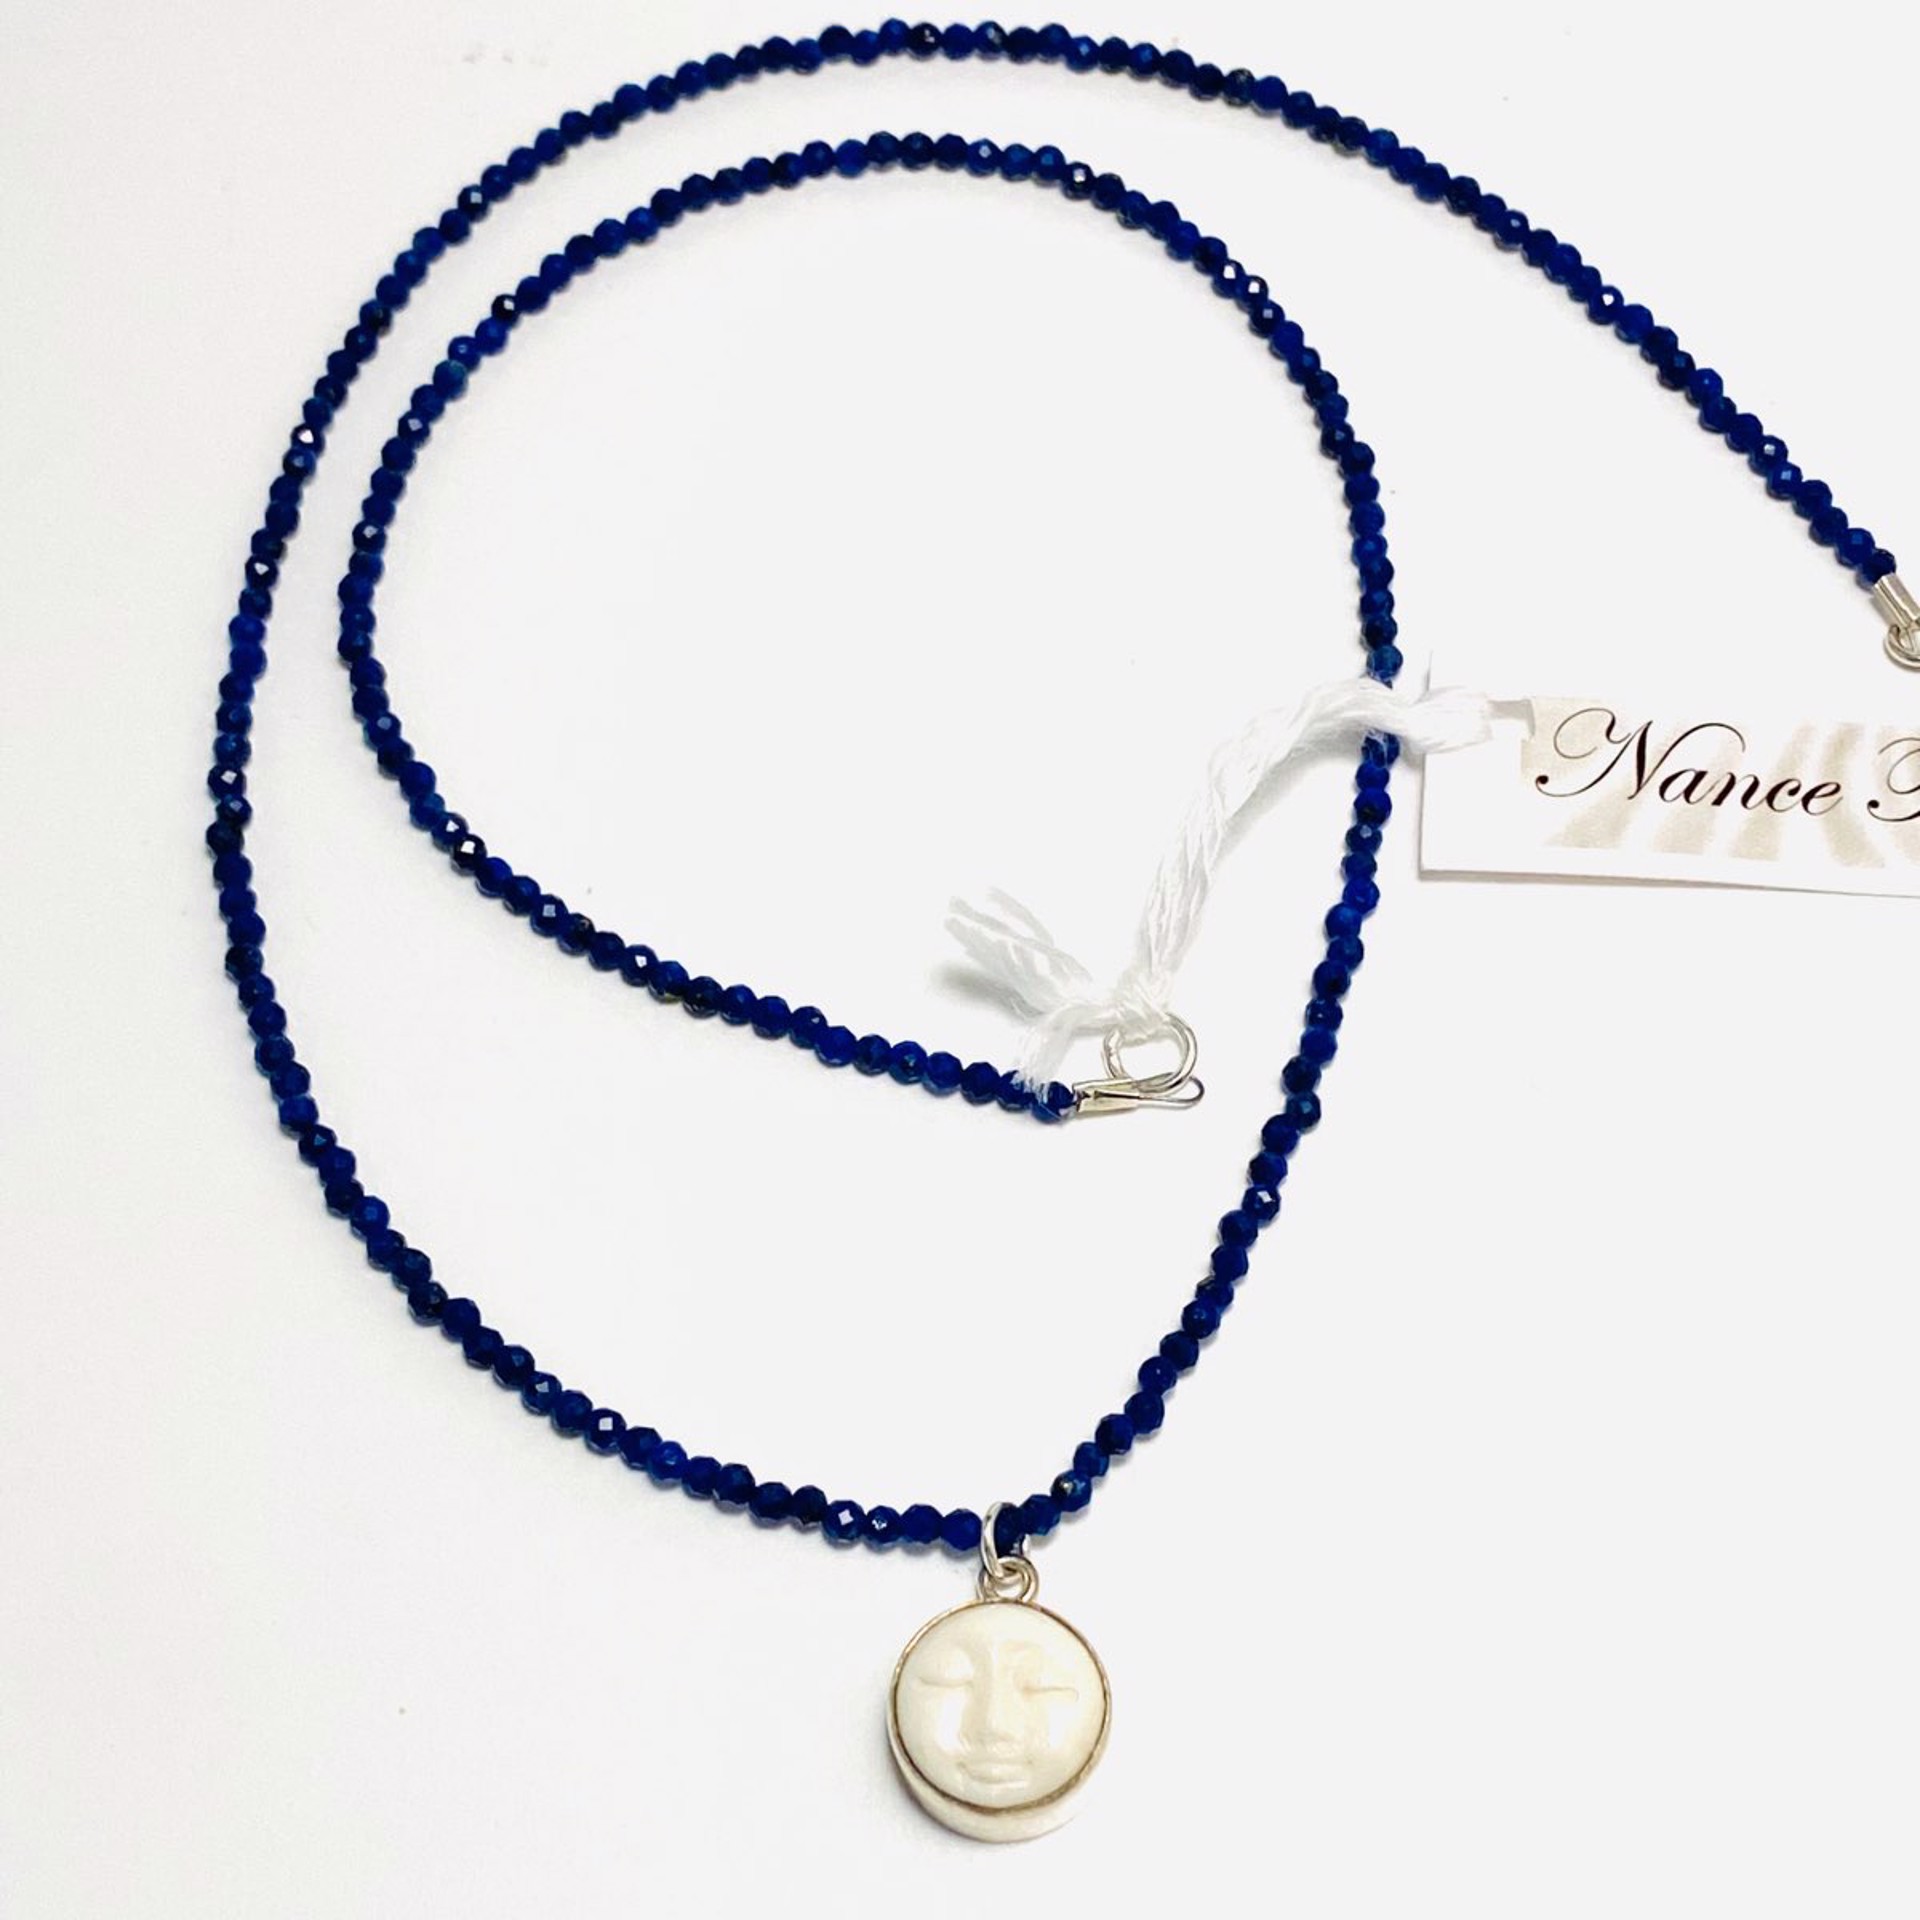 NT22-178 Tiny Faceted Lapis  Carved Bone Moon Face Charm Necklace by Nance Trueworthy